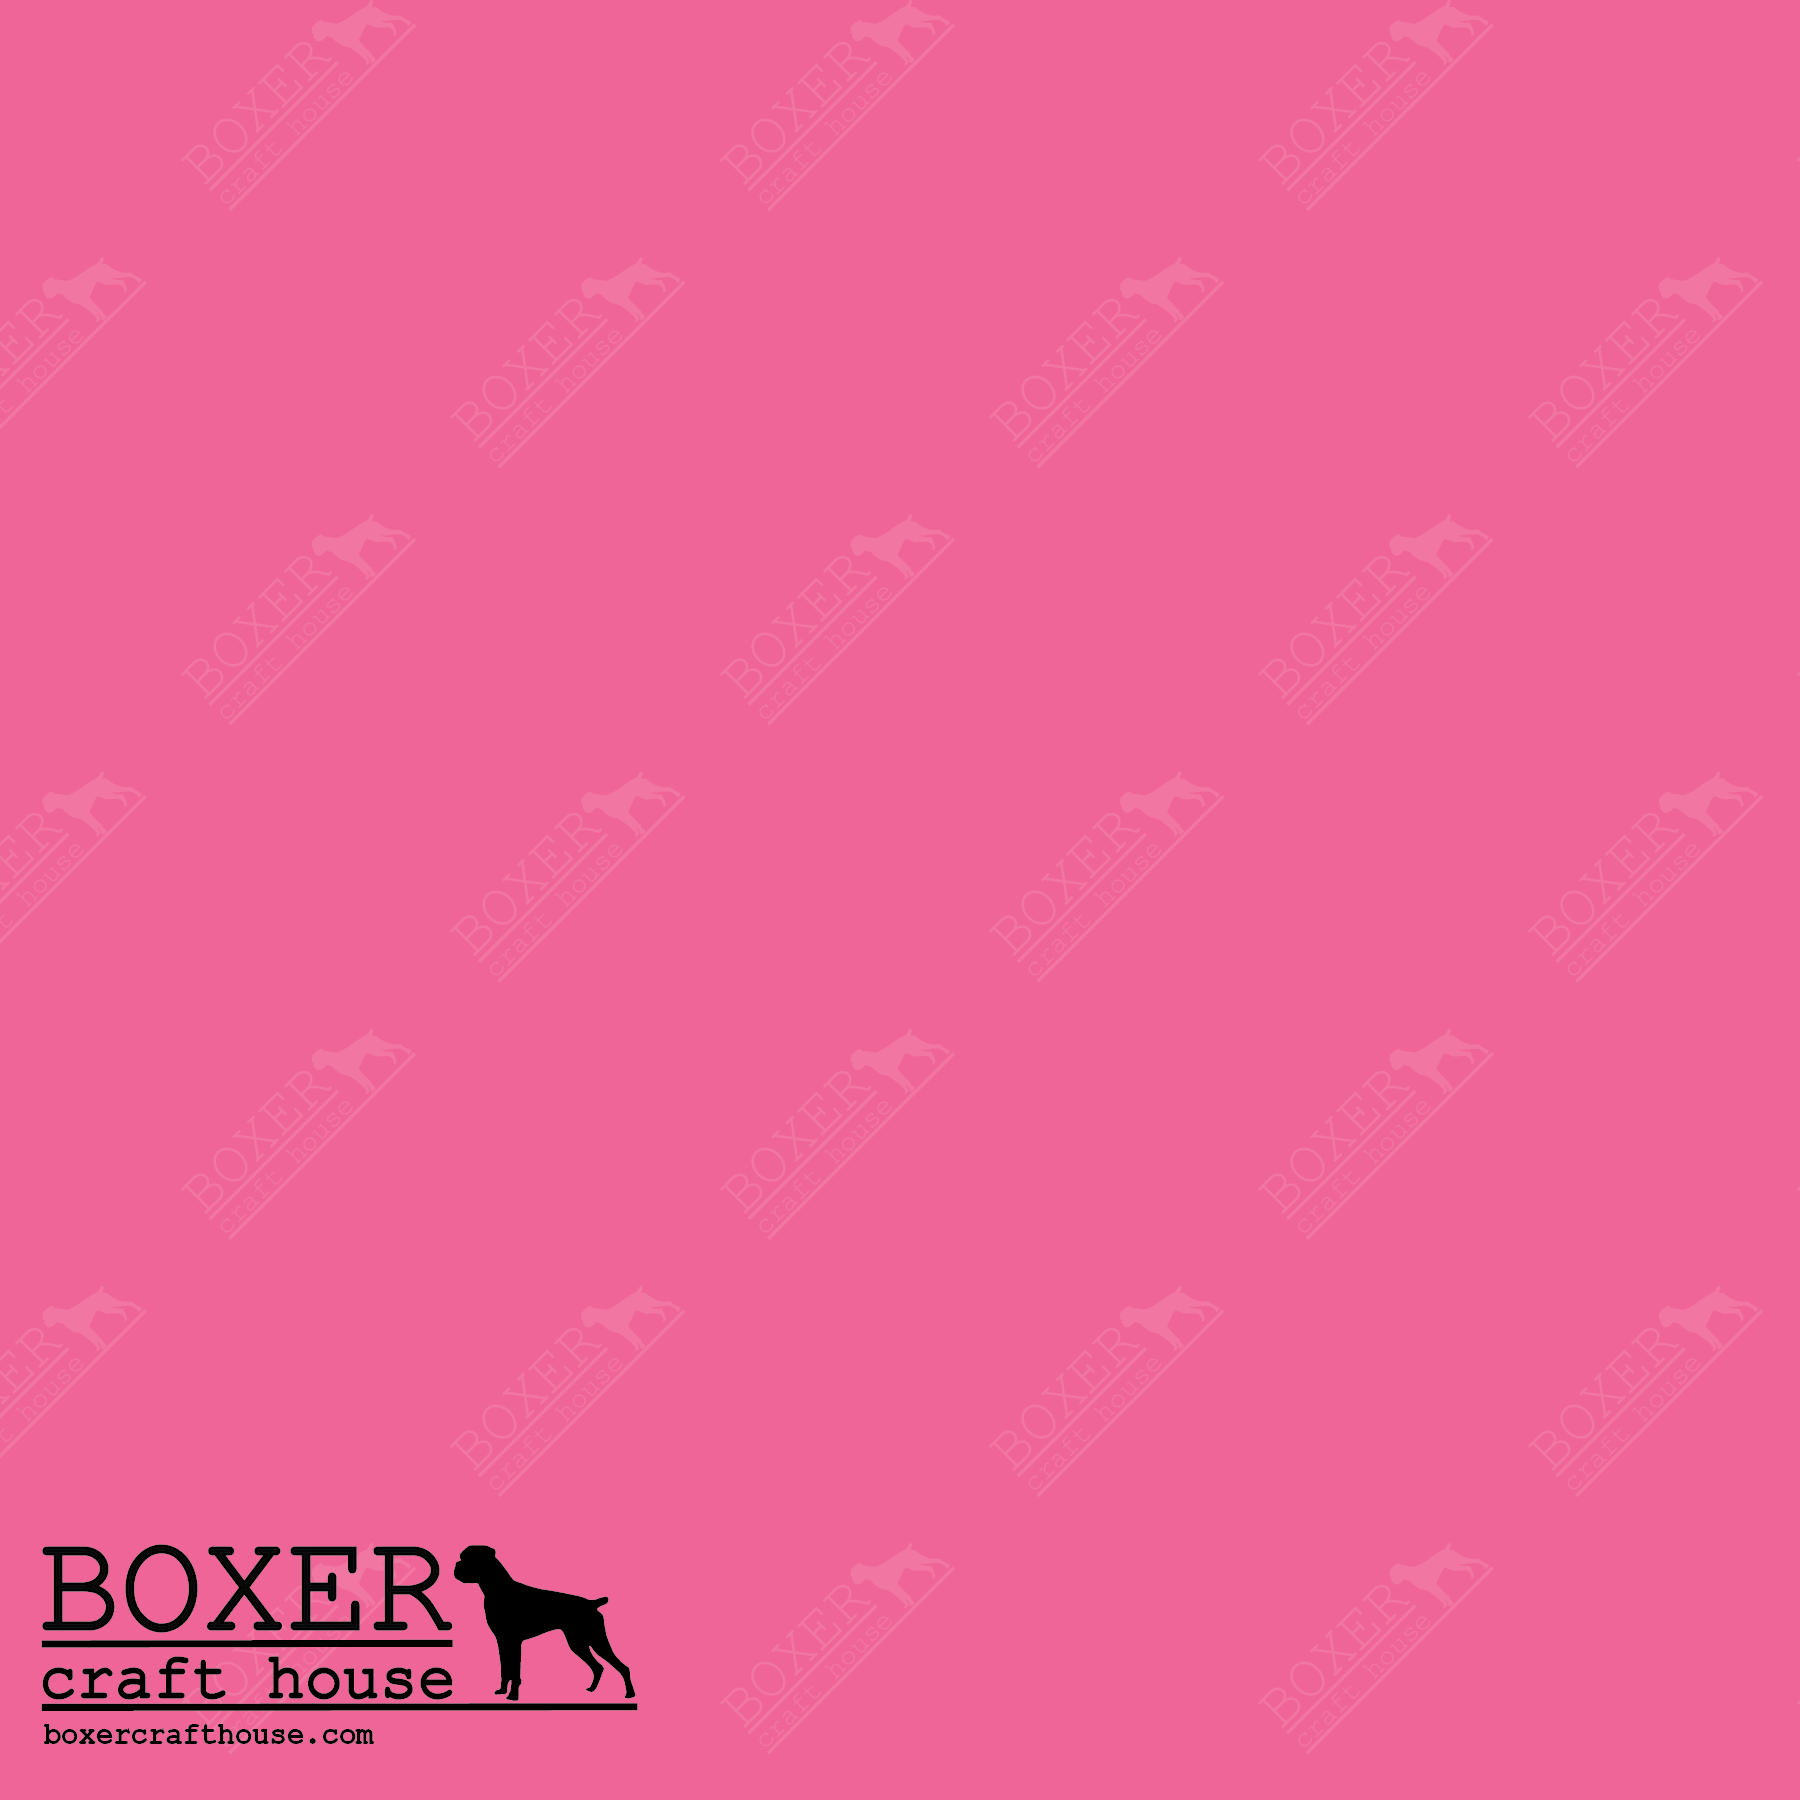 Breast Cancer Faux Leather, Embroidery Vinyl, Sewing Faux Leather, Bag Making Supplies, Faux Leather For Embroidery, Quality Faux Leather, Embroidery Supplies, Sewing Supplies, Woman Owned Business, Craft Supply Store, USA, In the Hoop Supplies, Sewing with vinyl,Specialty Vinyl, Printed in the USA Faux Leather,Pink, Wear pink, Love the tatas, Breast Cancer Embroidery Vinyl, Breast Cancer Faux Leather